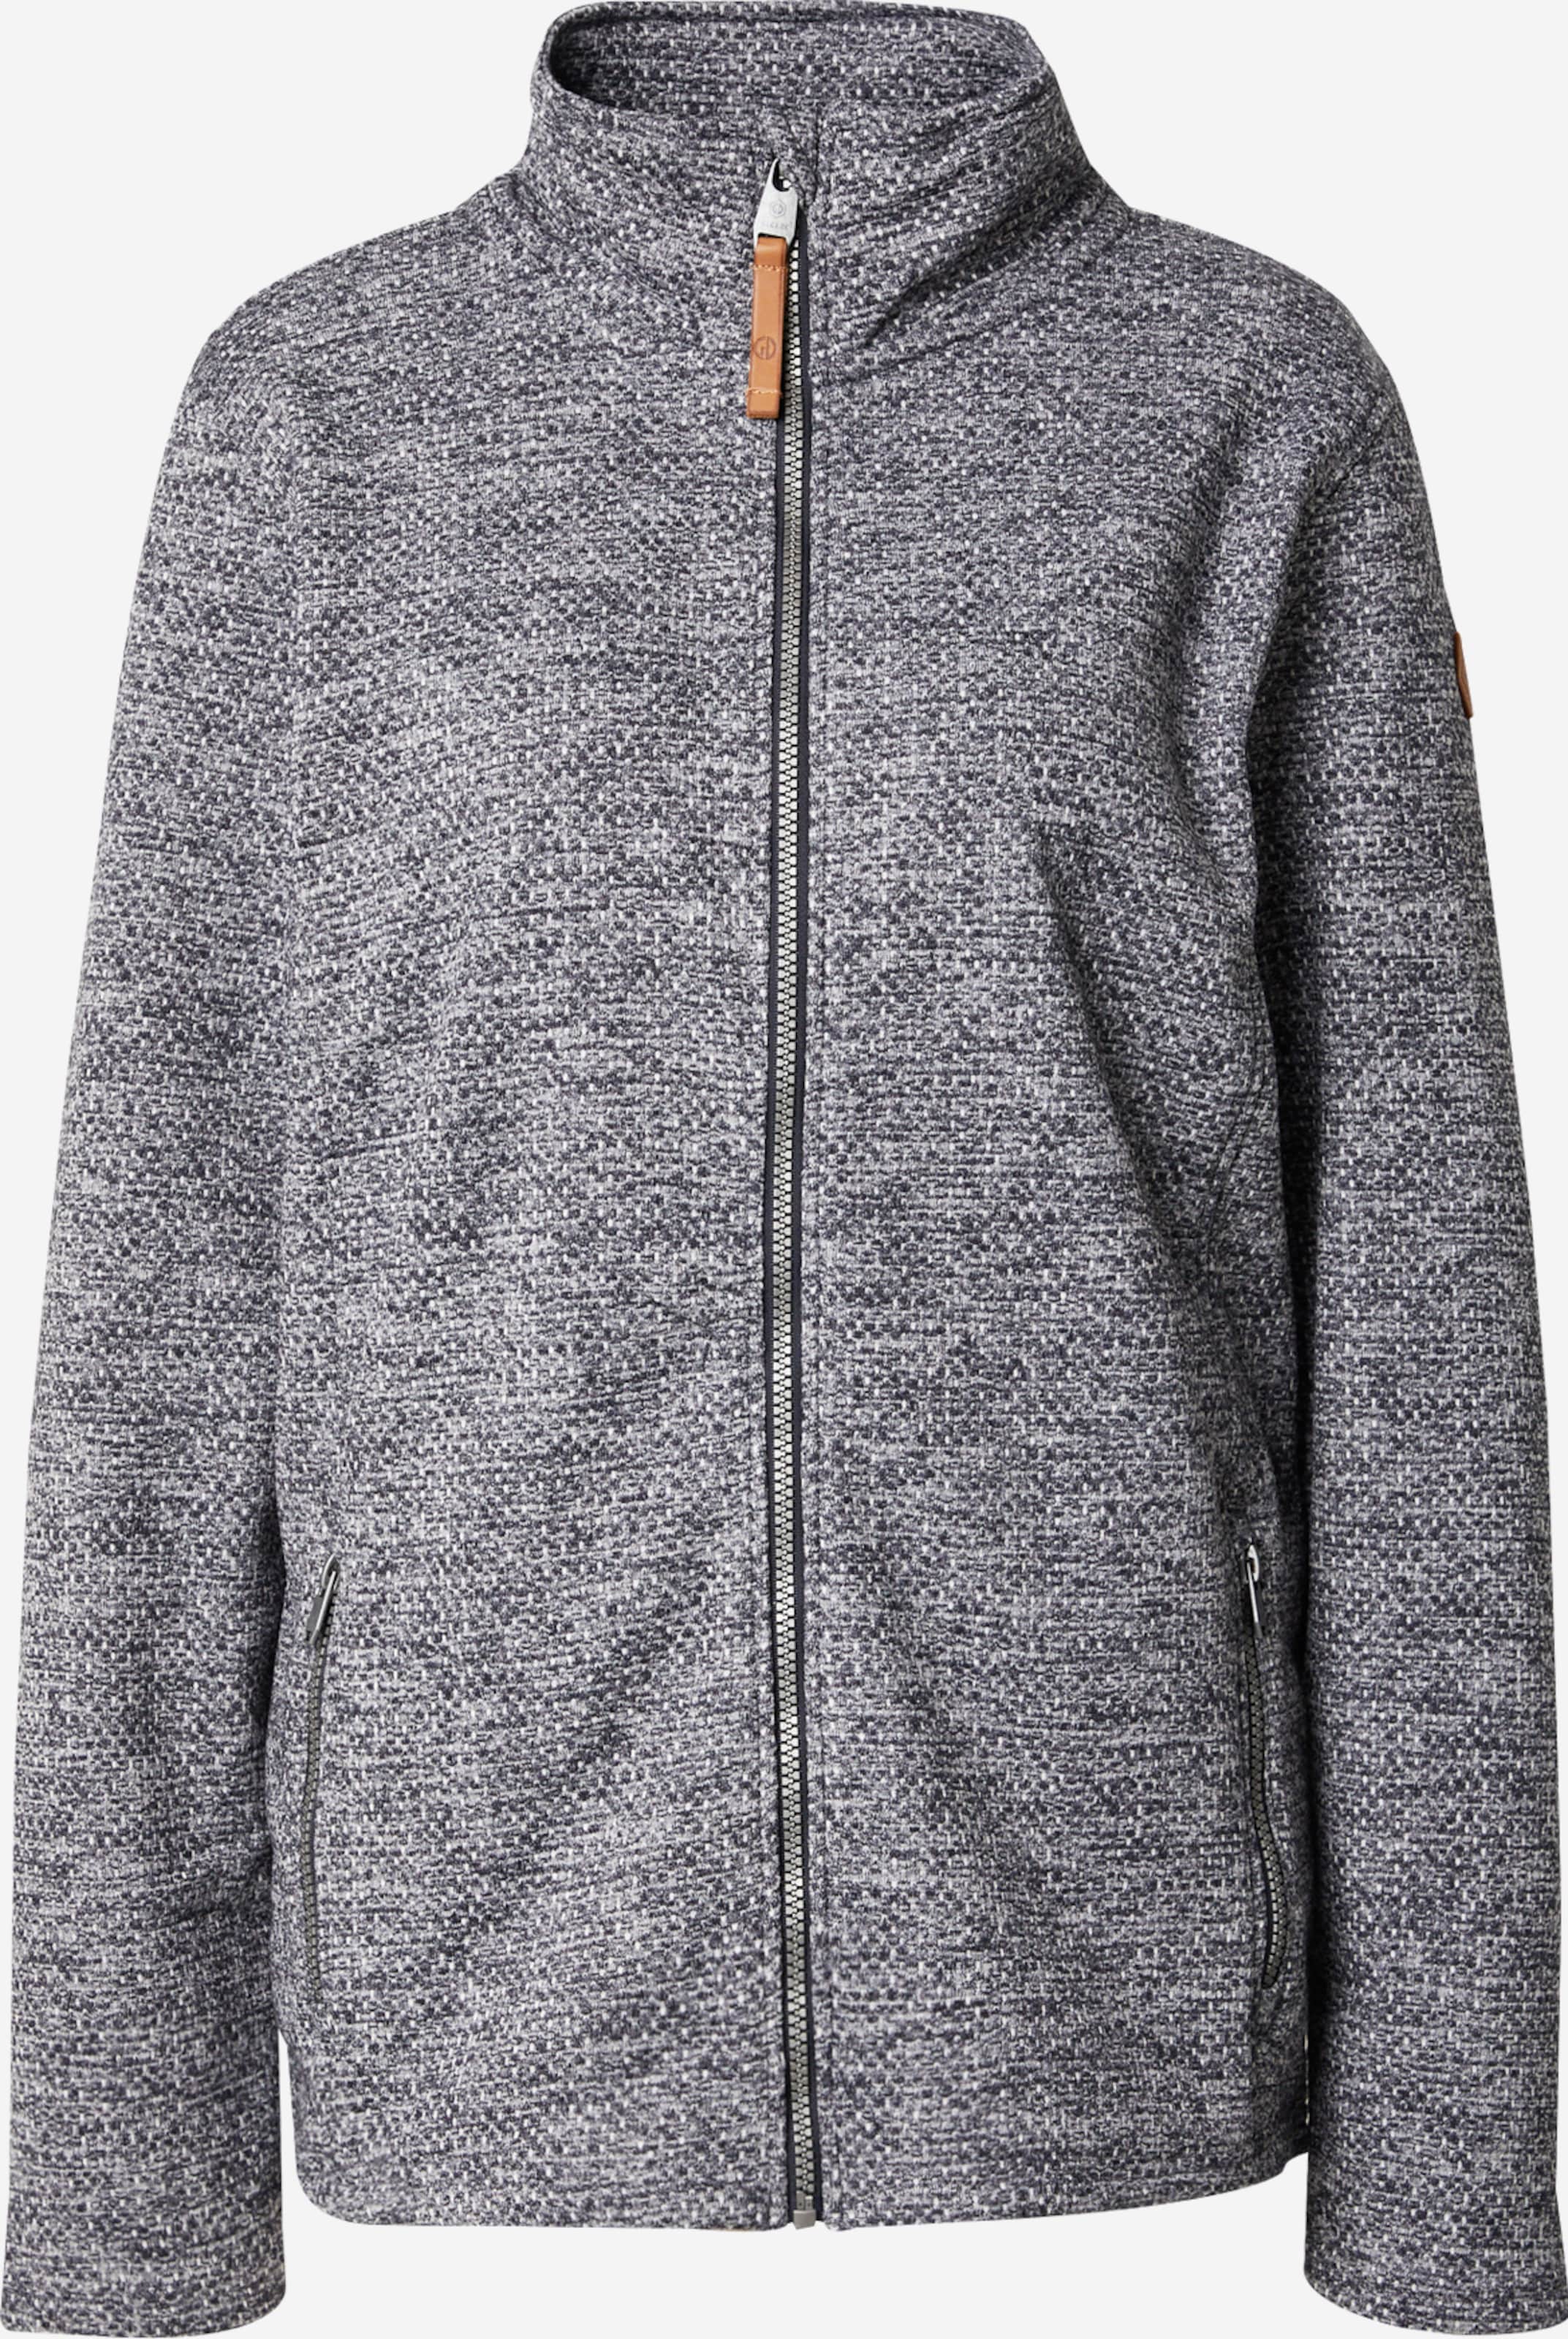 Blue Fleece YOU Athletic by Dark in ABOUT killtec DX Jacket G.I.G.A. |